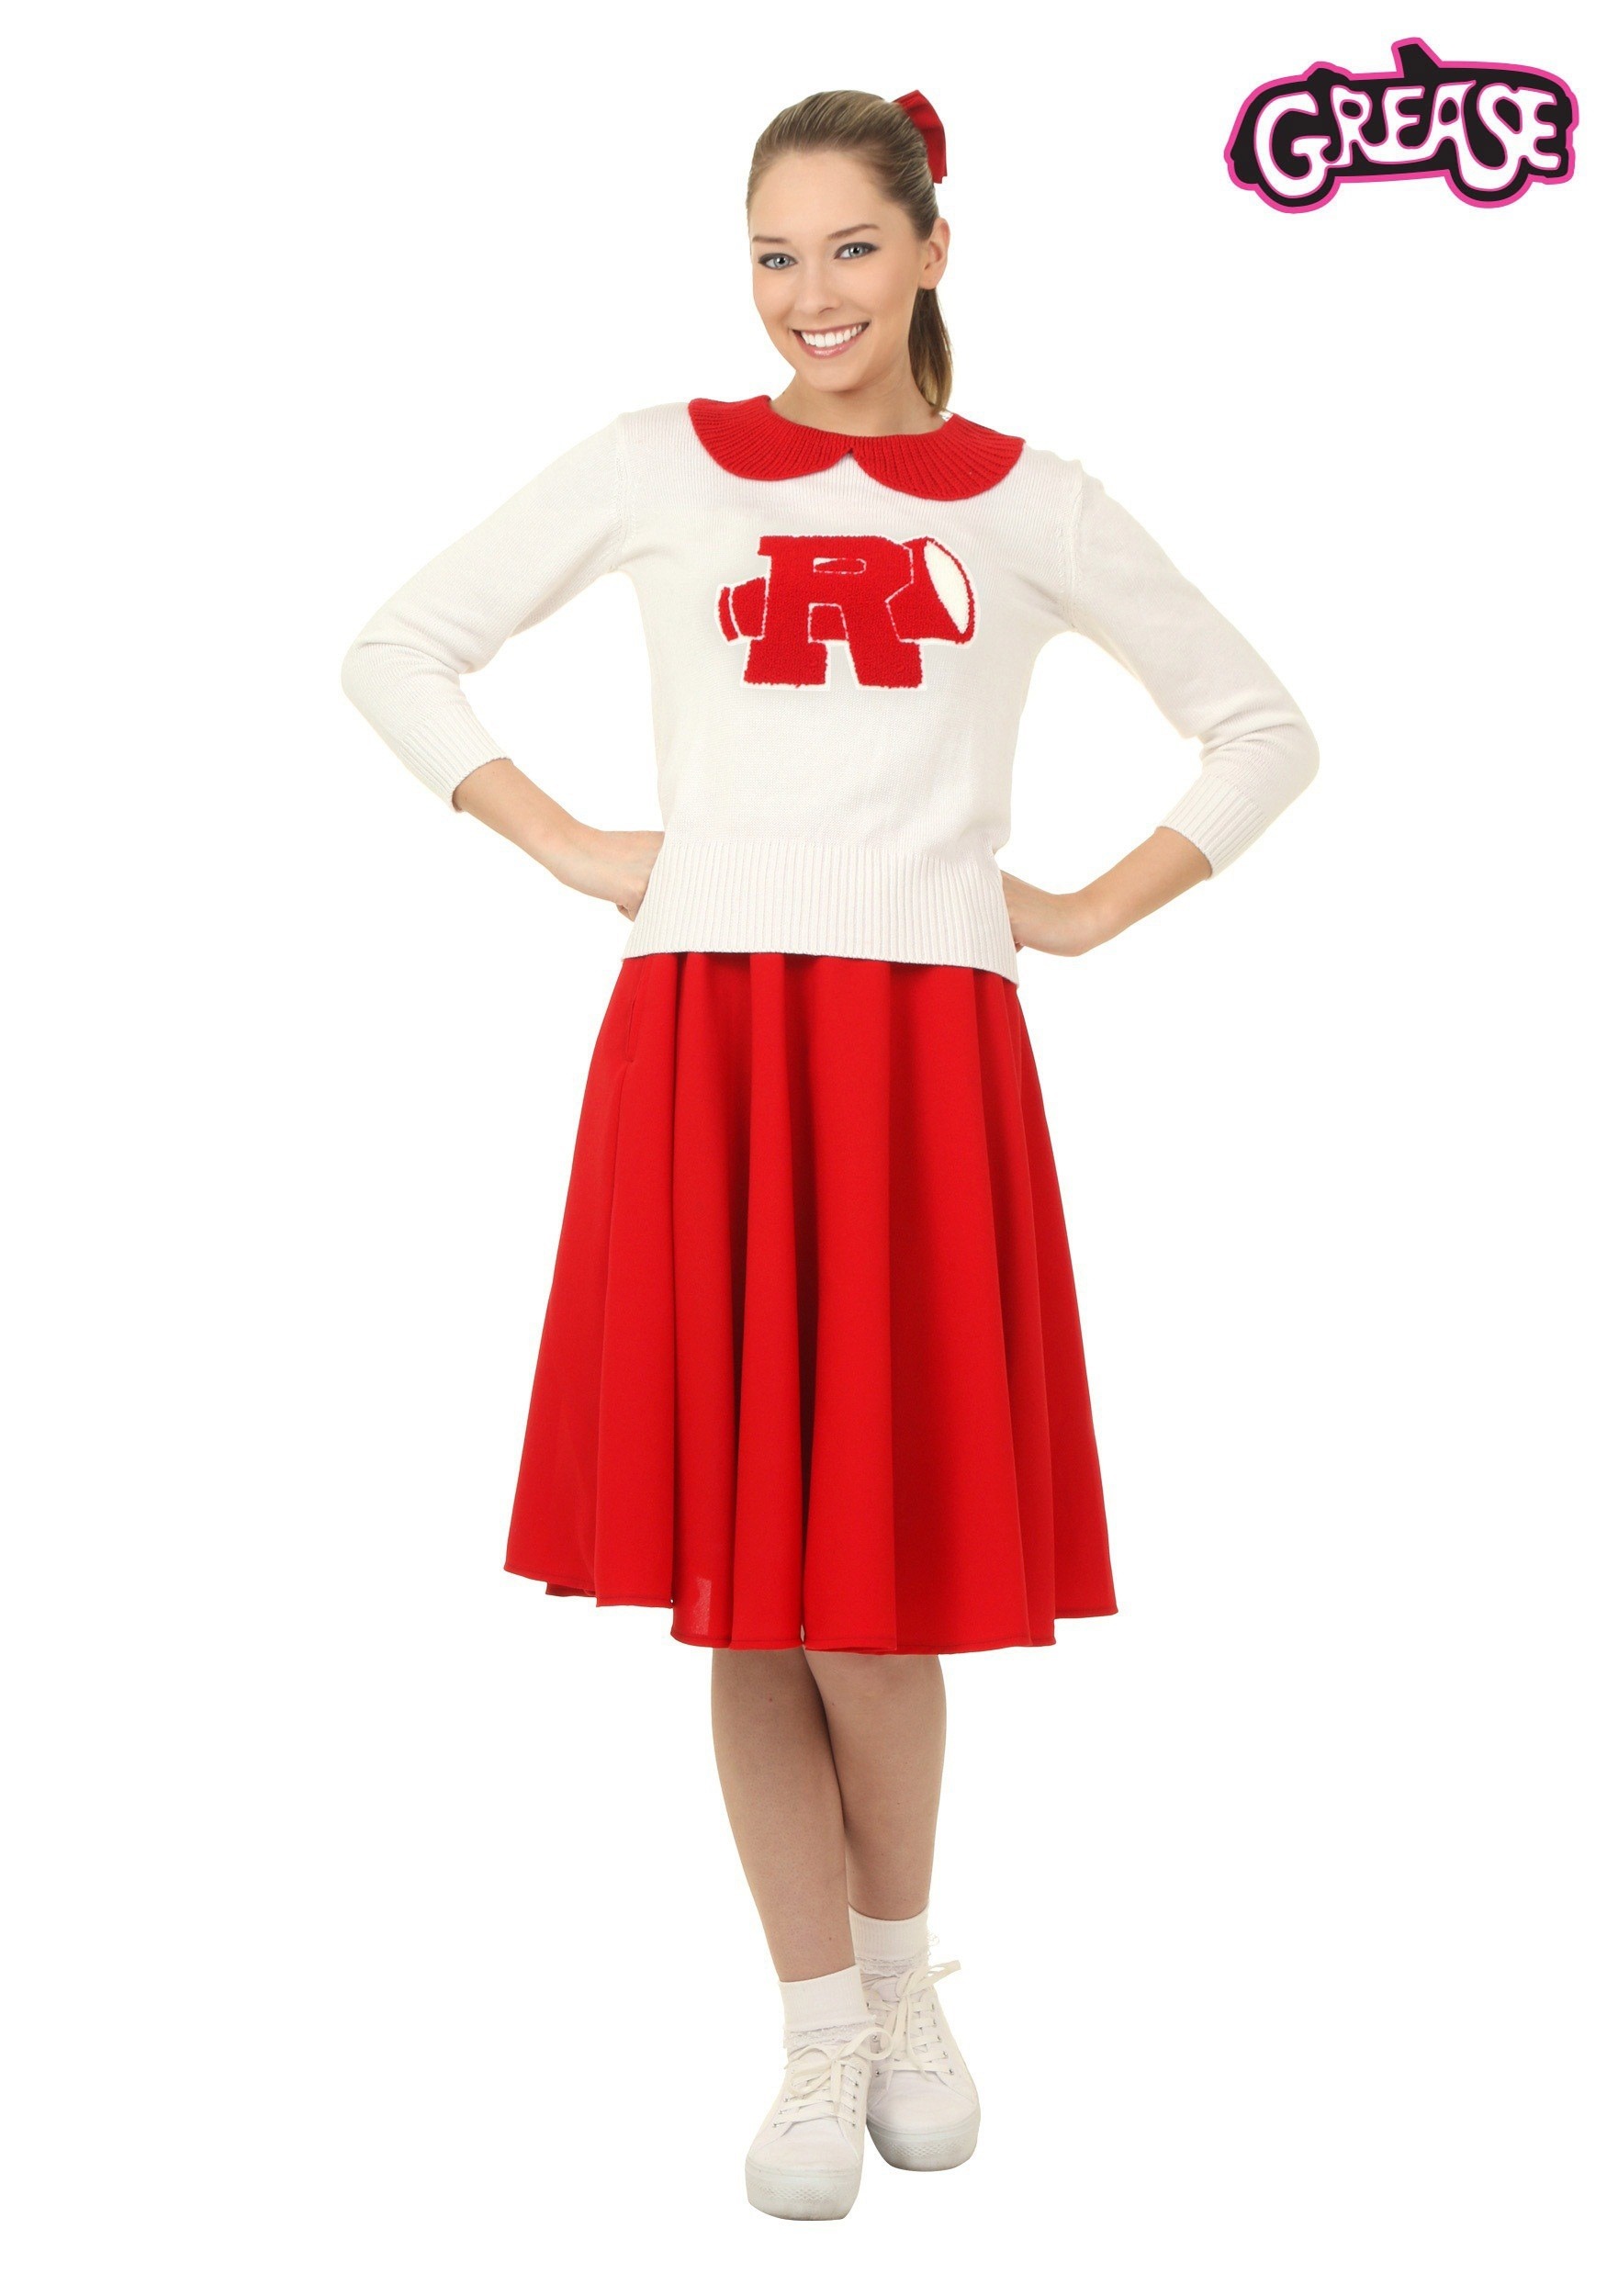 Grease Rydell High Plus Size Cheerleader Costume for Women